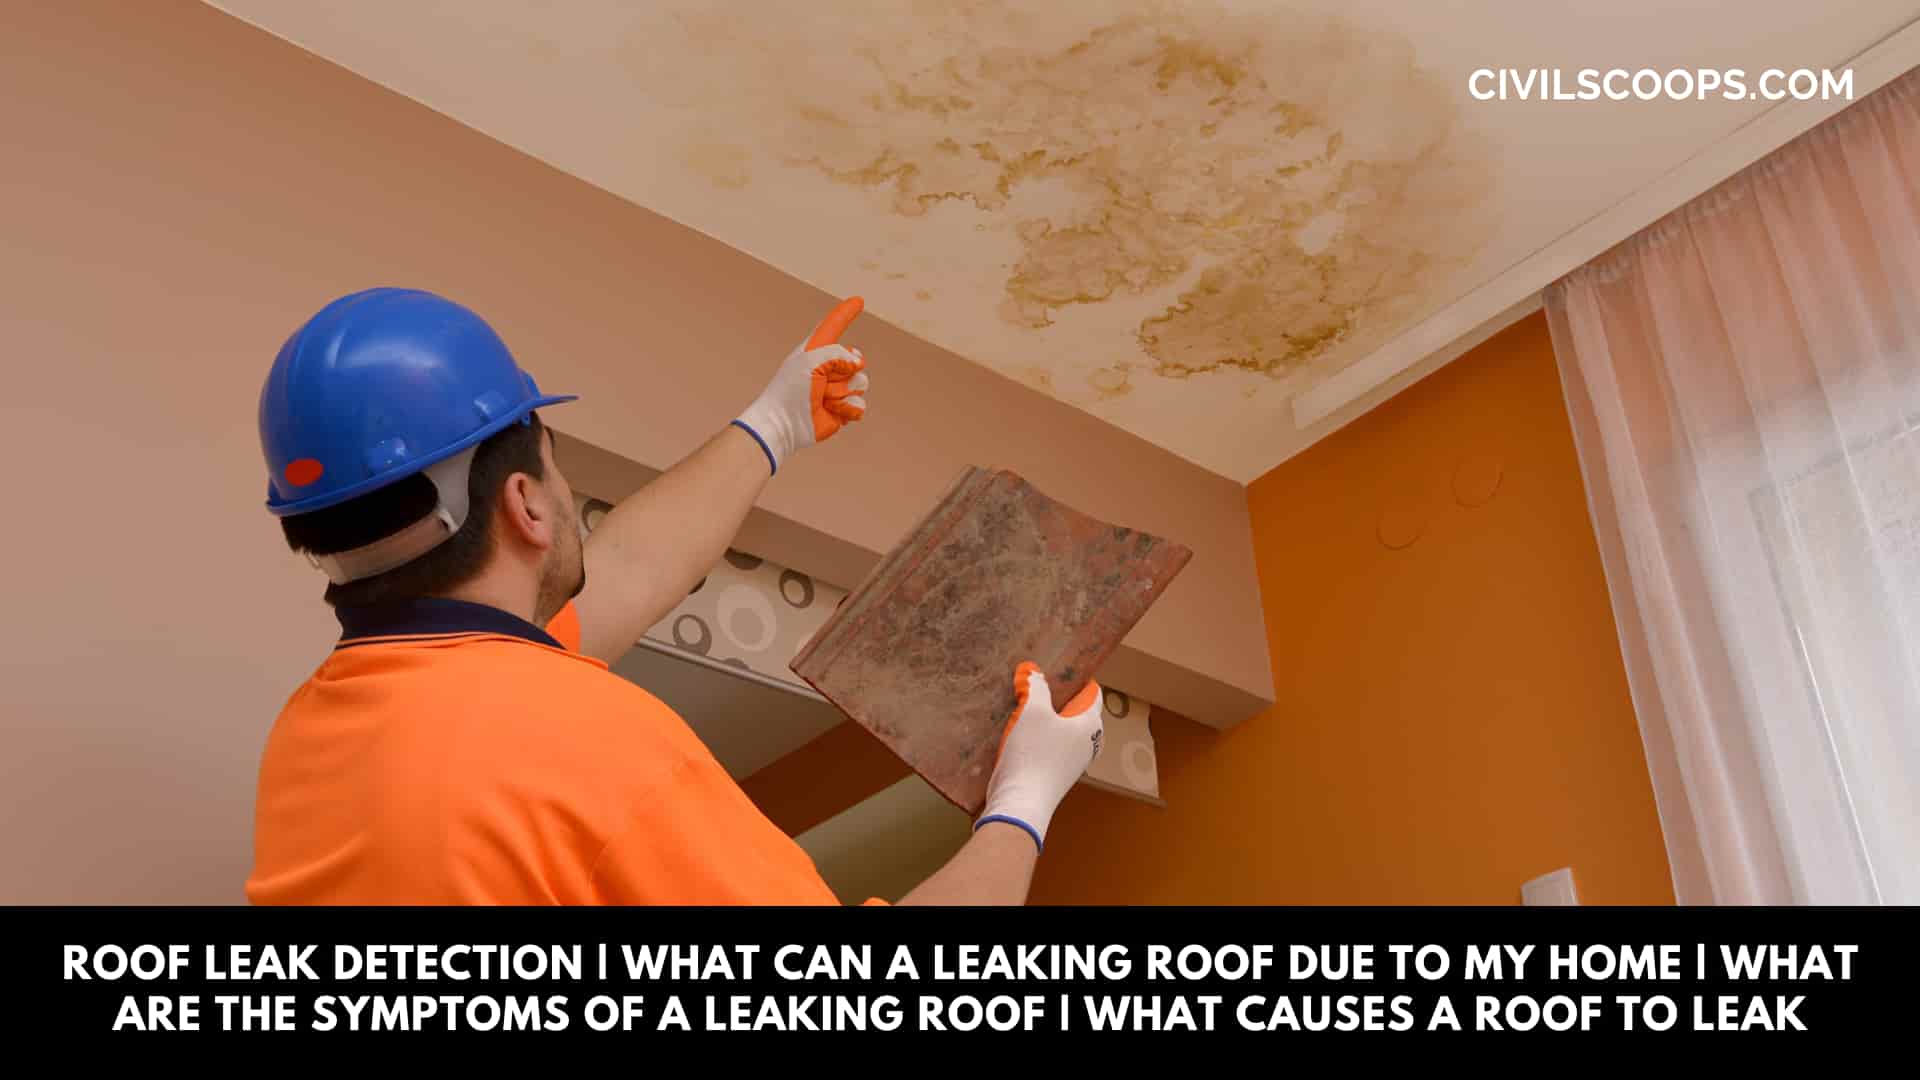 Roof Leak Detection What Can a Leaking Roof Due to My Home What Are the Symptoms of a Leaking Roof What Causes a Roof to Leak